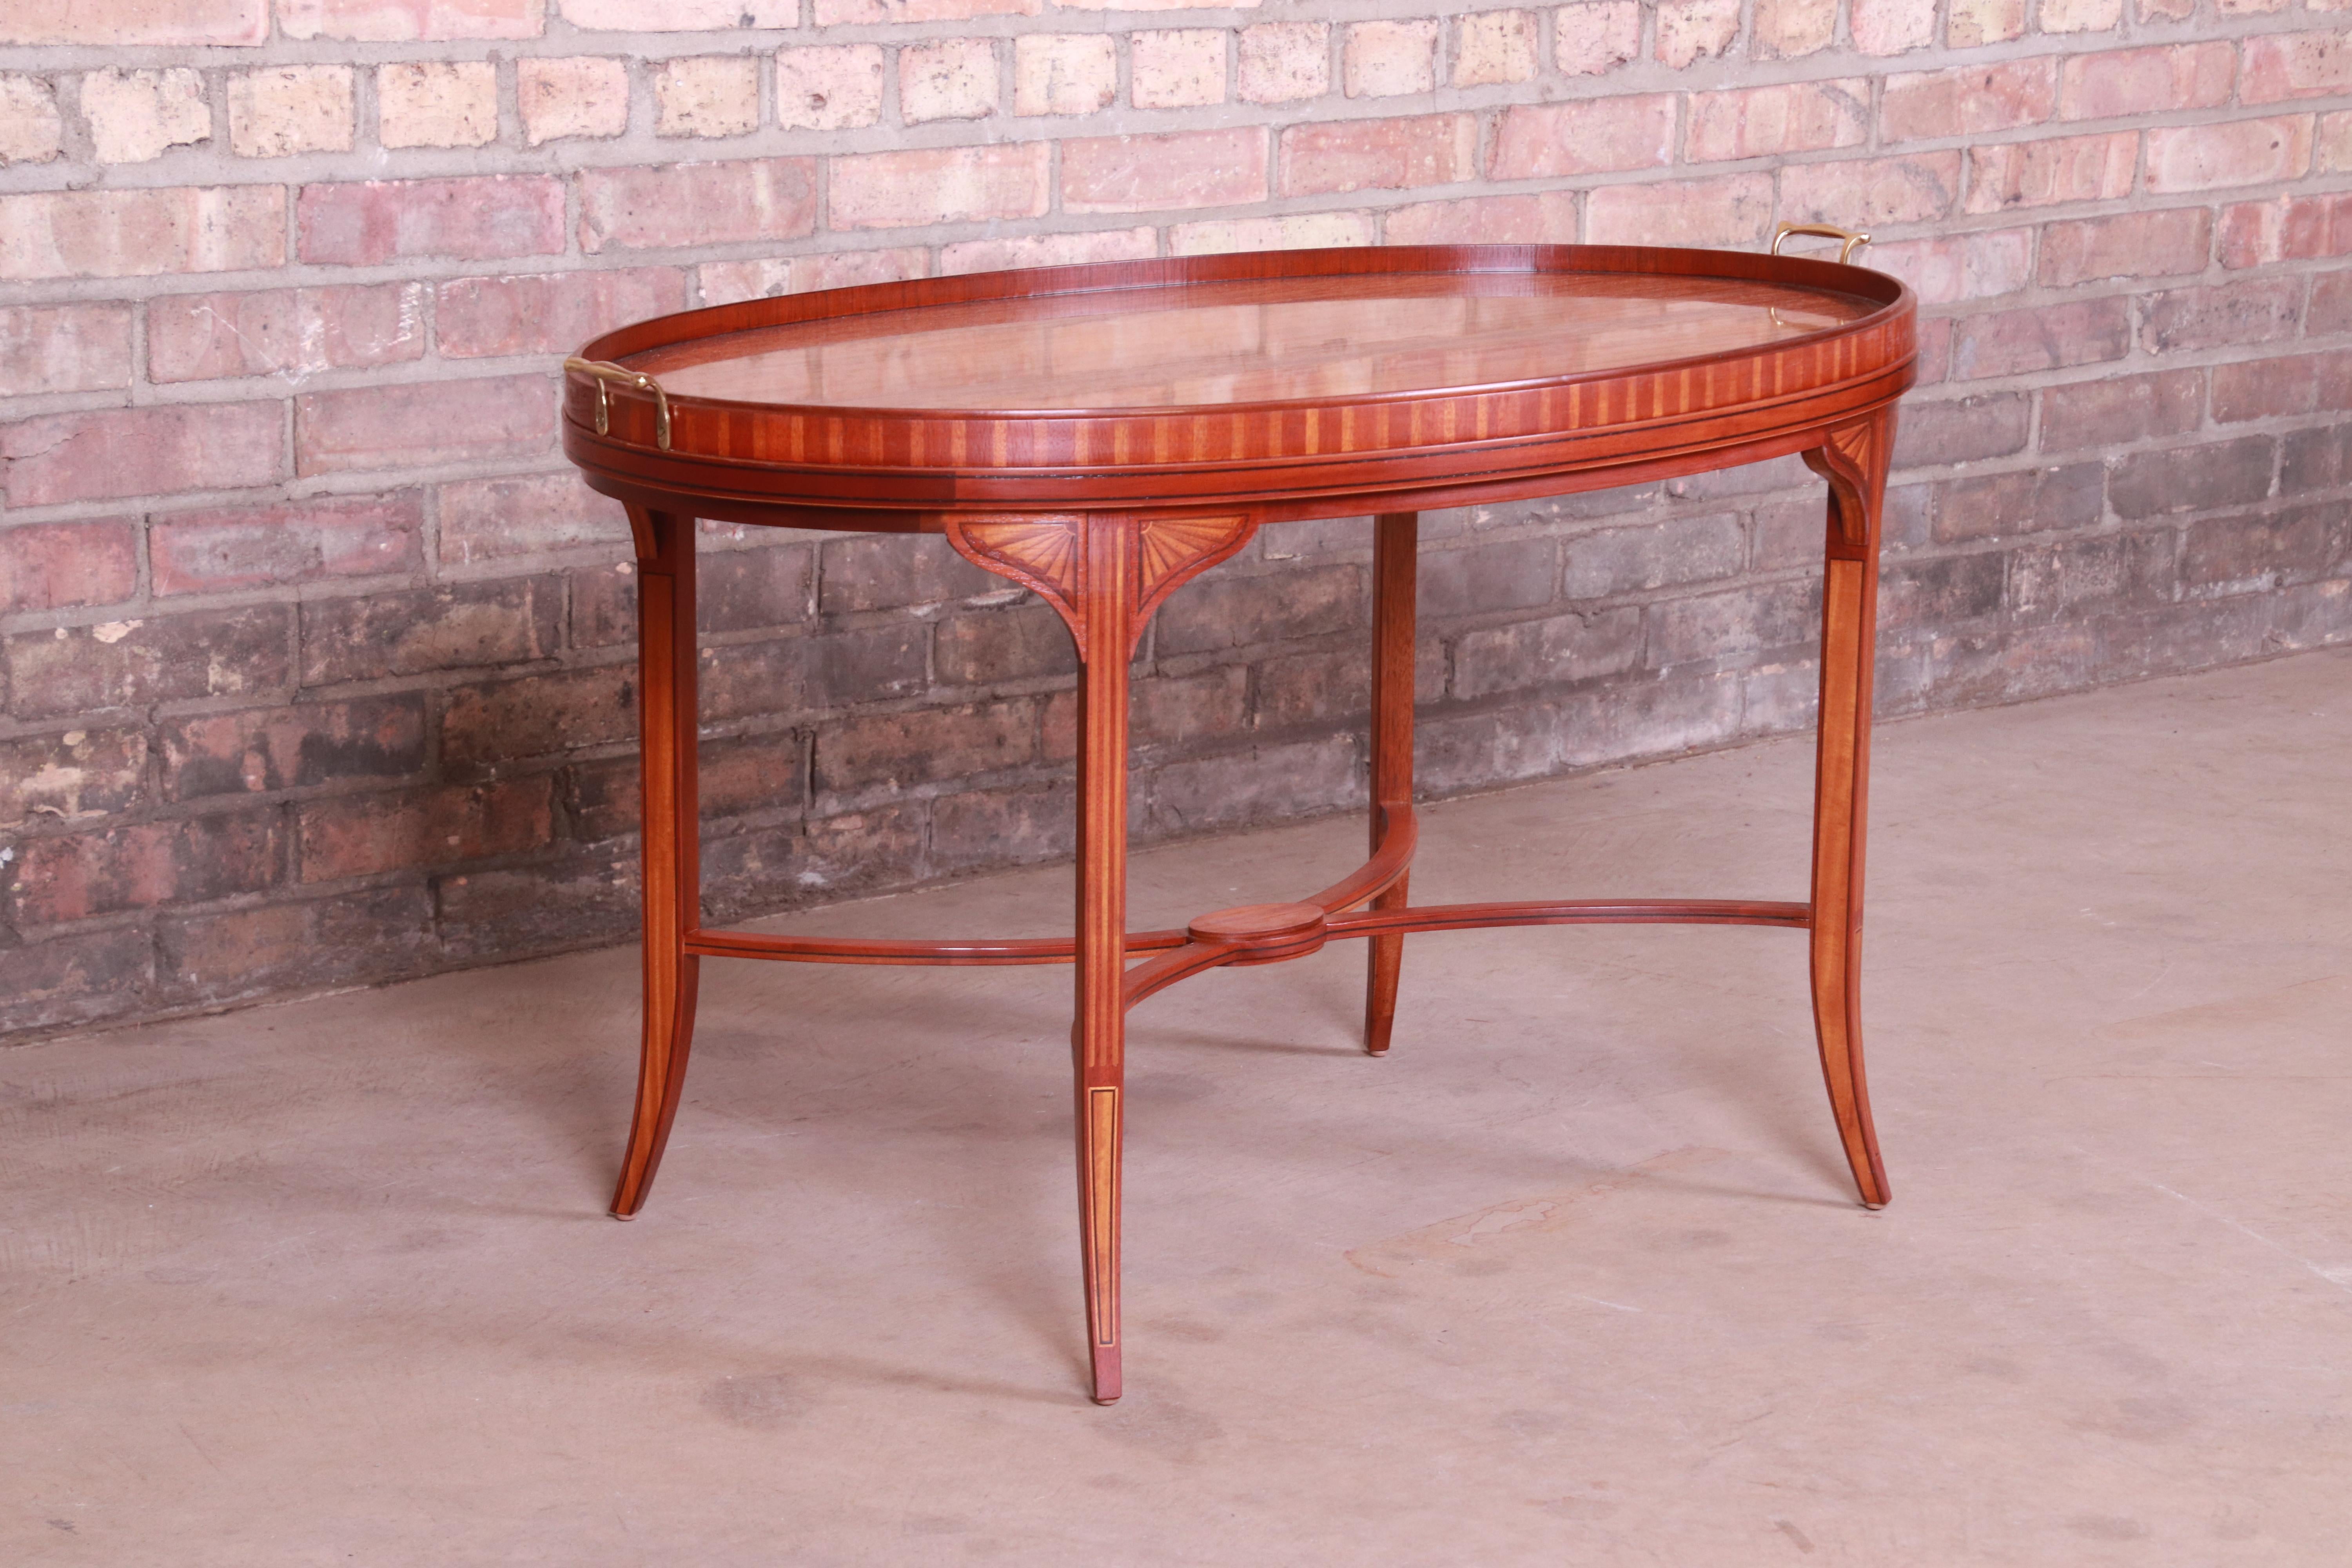 Baker Furniture Historic Charleston Inlaid Mahogany and Satinwood Coffee Table In Good Condition For Sale In South Bend, IN